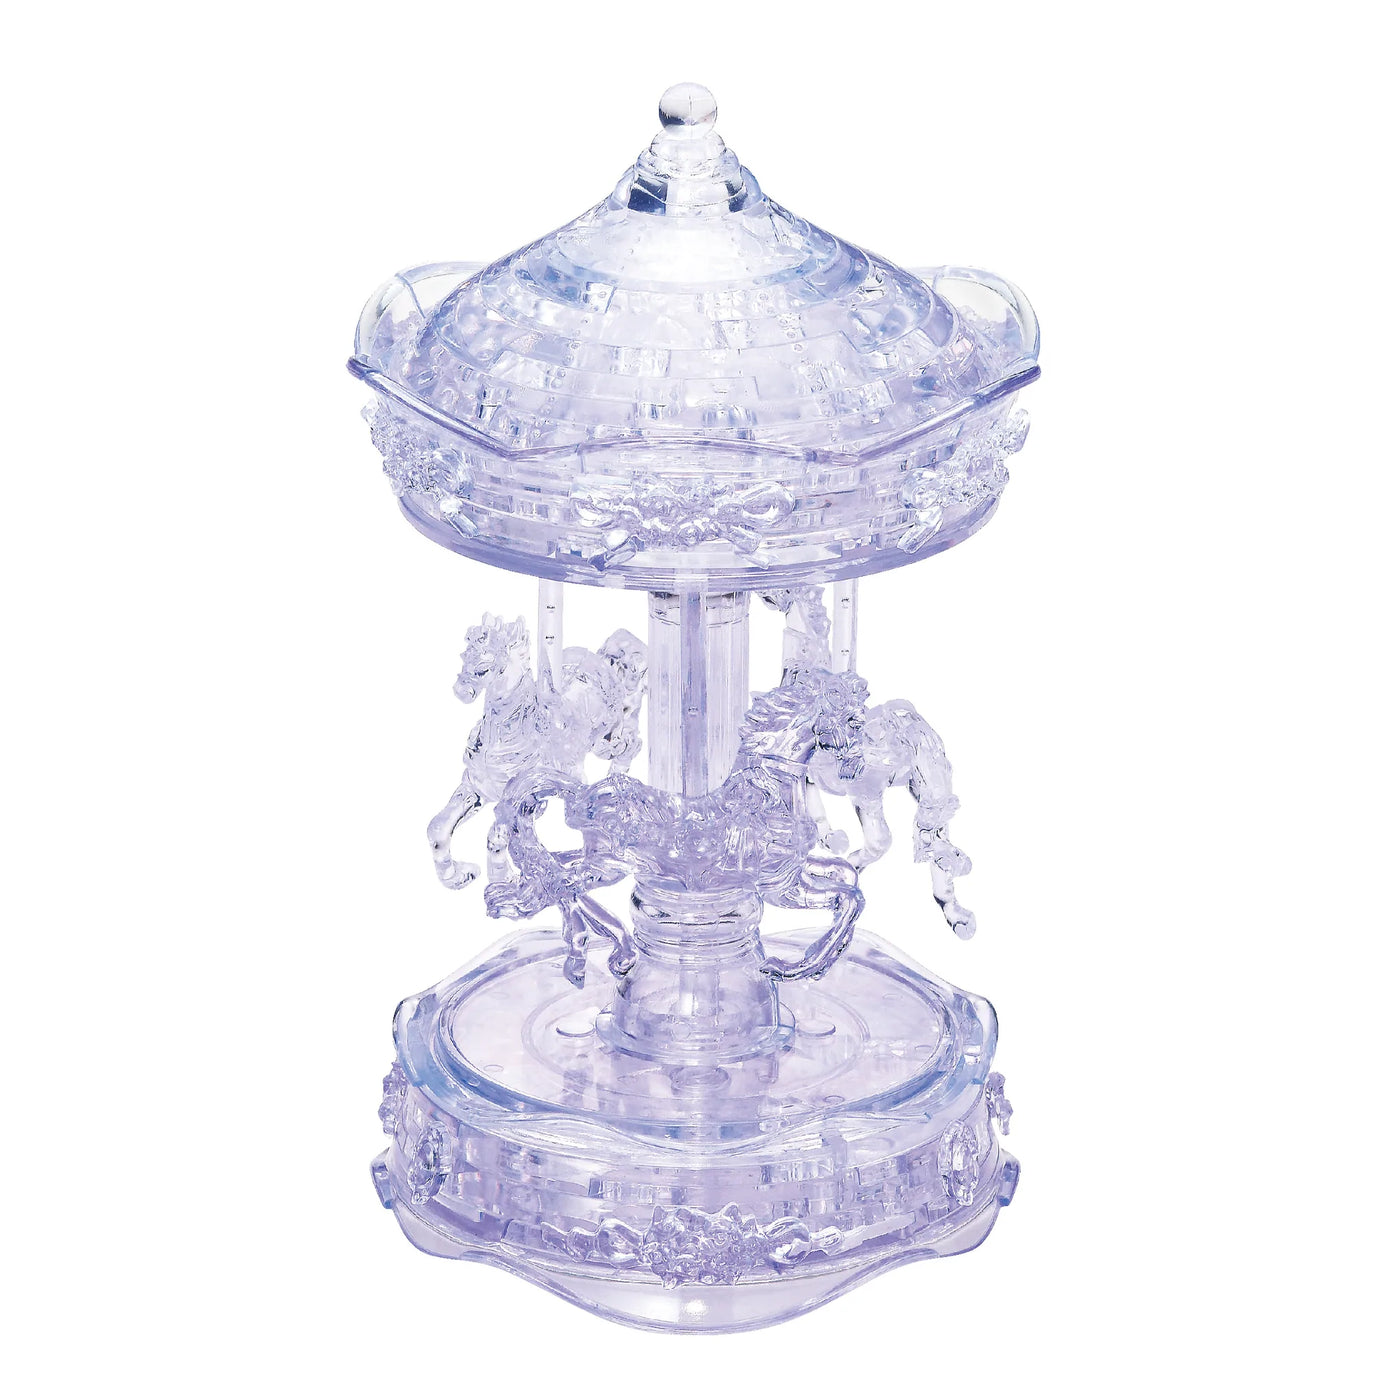 3D Clear Carousel Crystal Puzzle